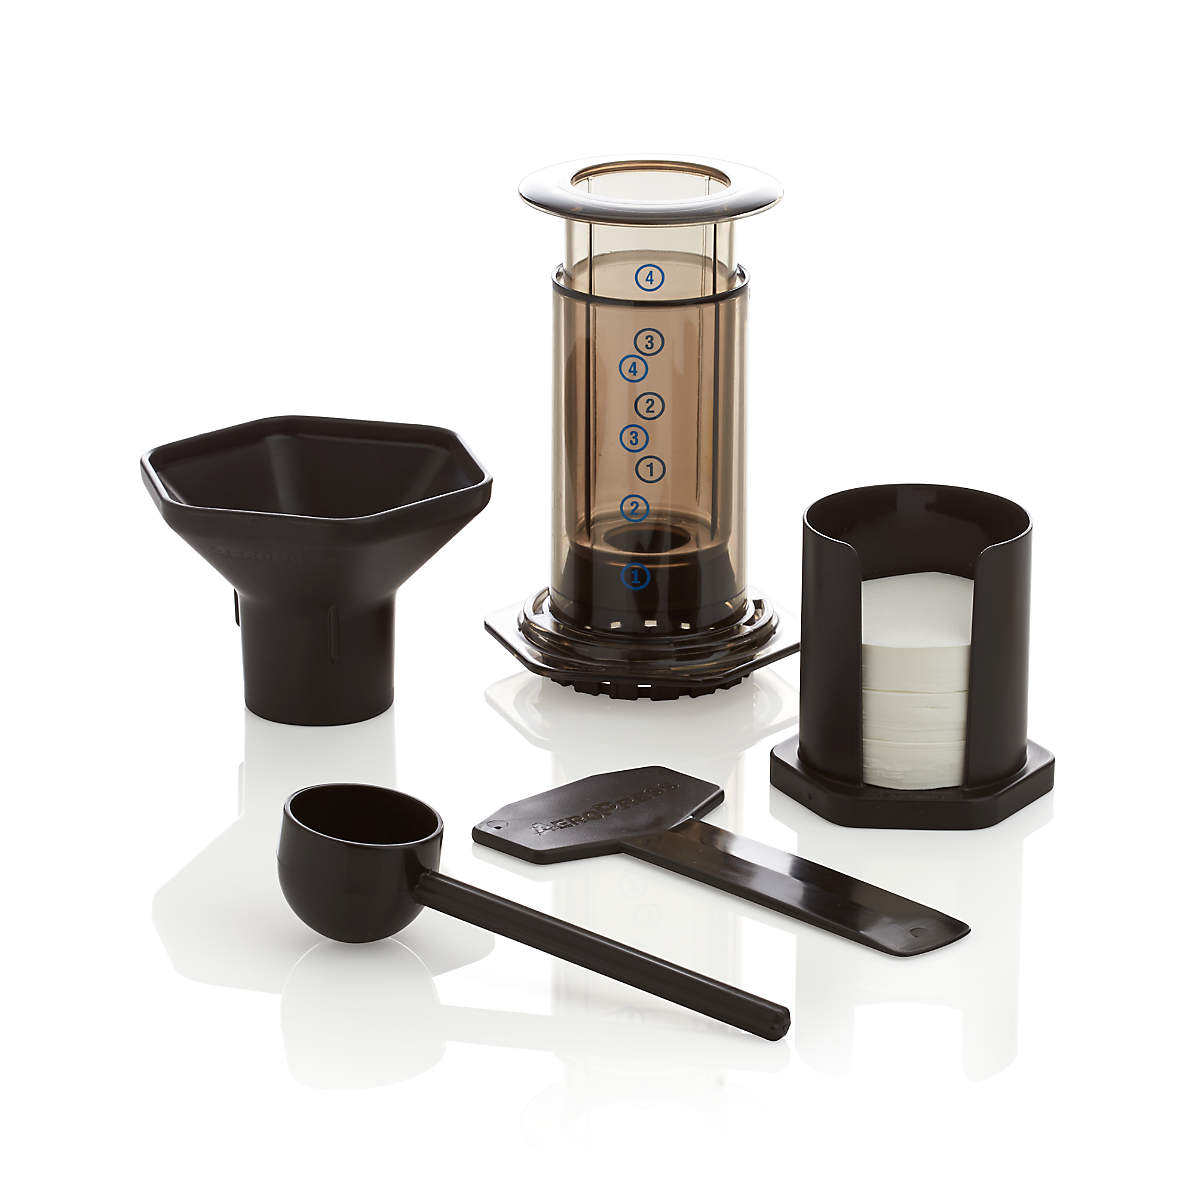 Aeropress Coffee Maker Reviews Crate And Barrel,How To Get Rid Of Flies In Home